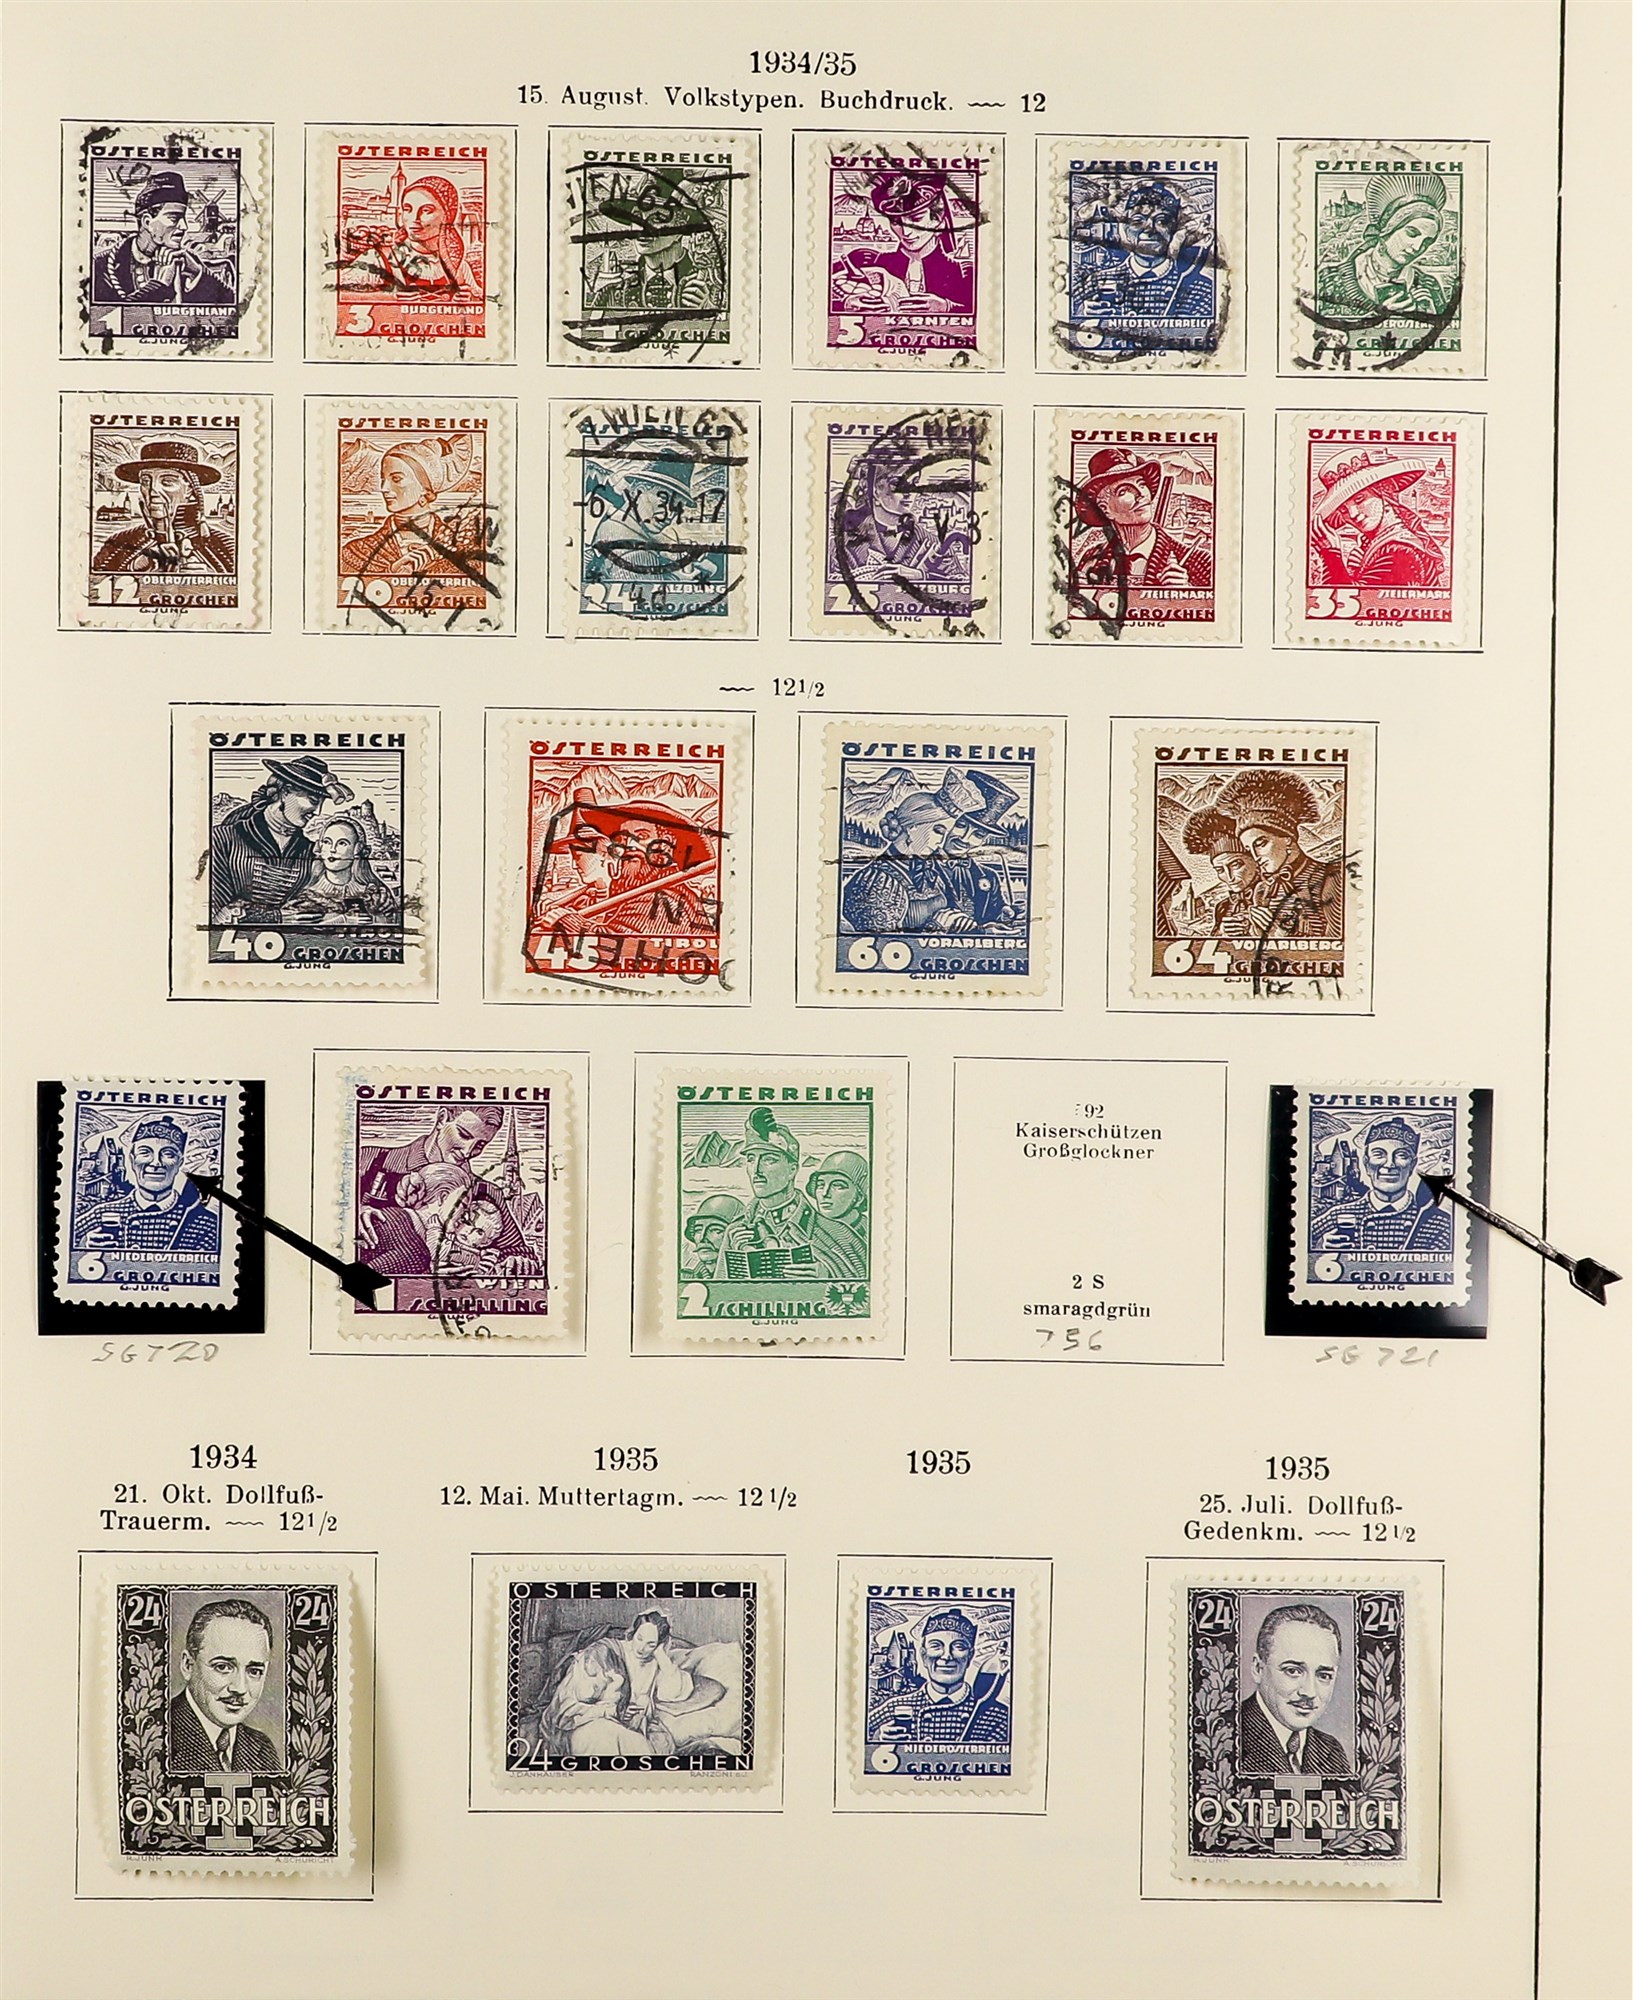 AUSTRIA 1918 - 1937 REPUBLIC COLLECTION of chiefly mint / never hinged mint sets in album incl - Image 20 of 22